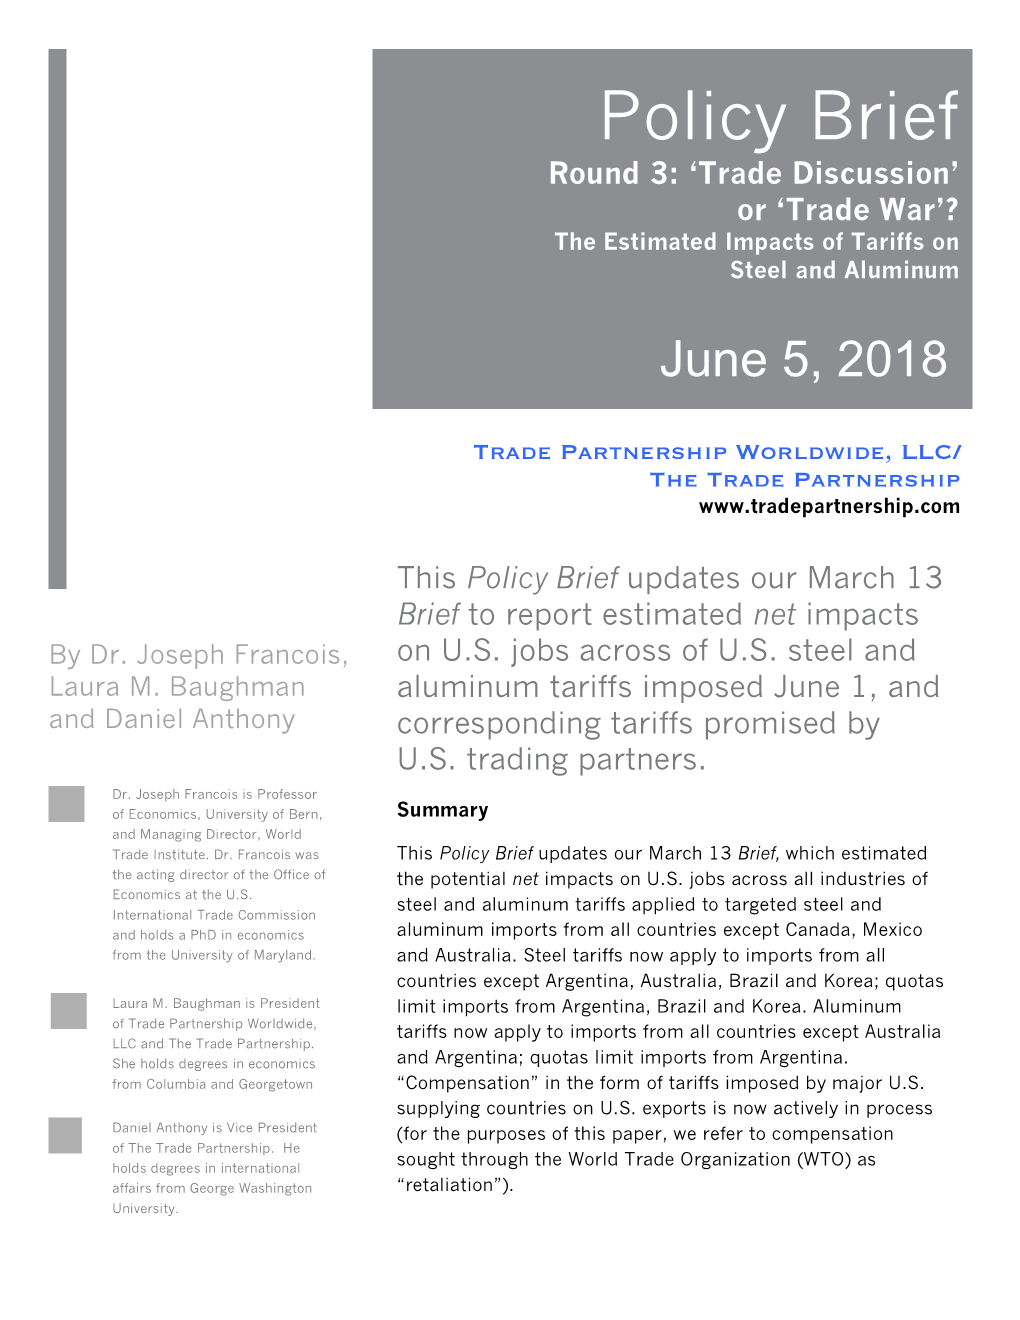 Policy Brief Round 3: ‘Trade Discussion’ Or ‘Trade War’? the Estimated Impacts of Tariffs on Steel and Aluminum